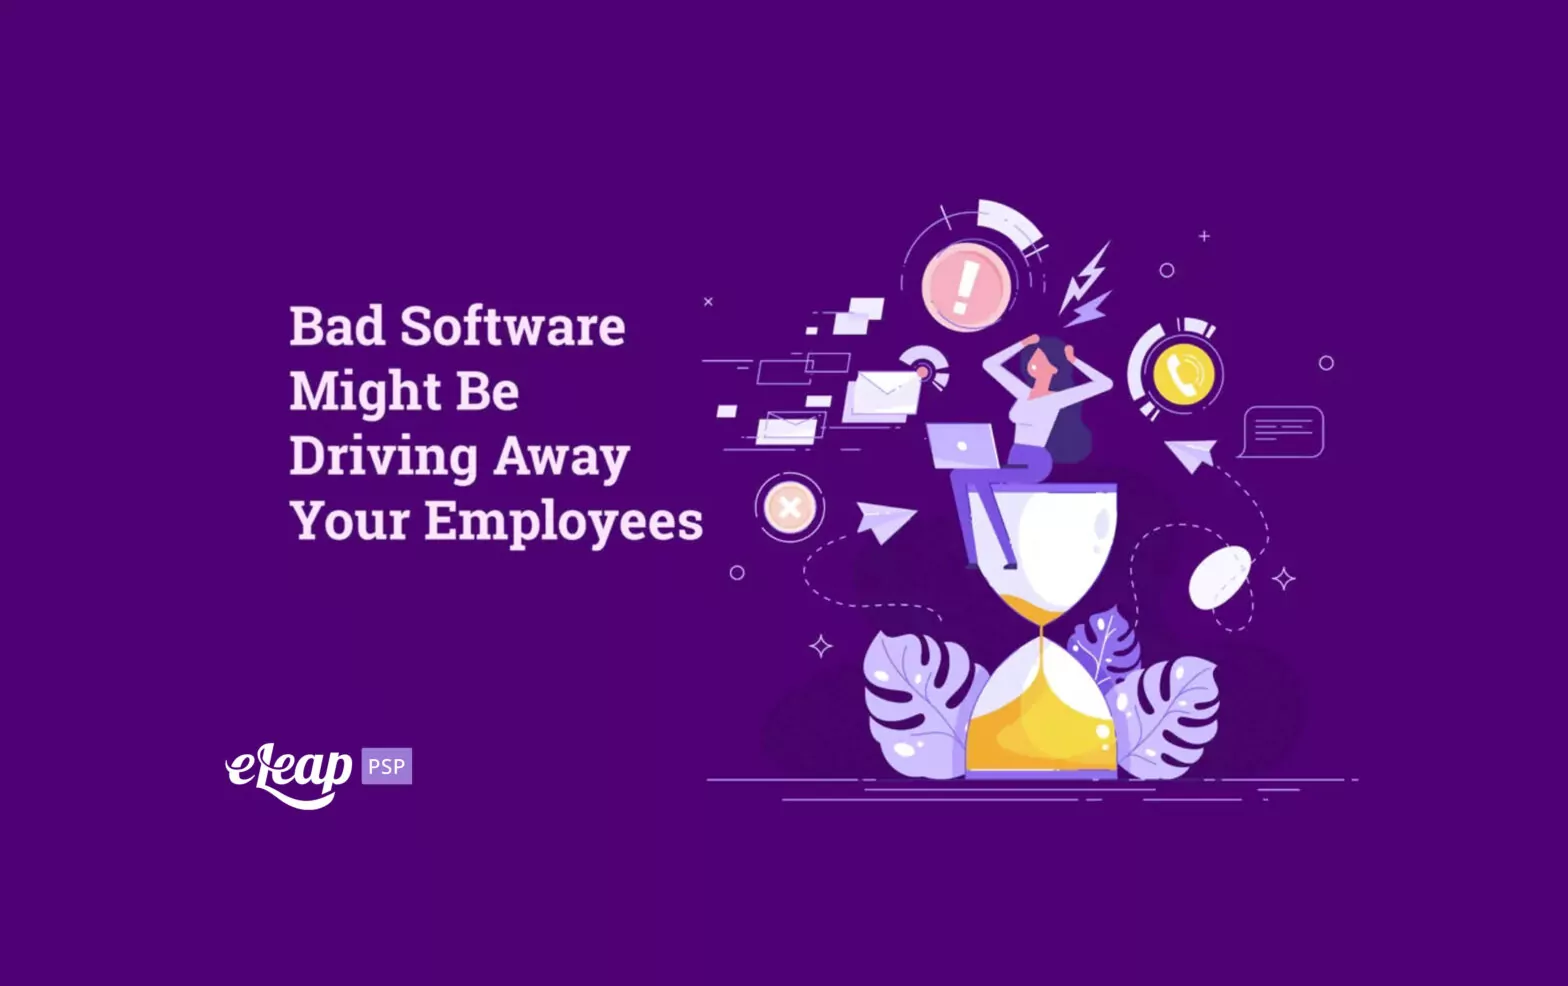 Bad Software Might Be Driving Away Your Employees